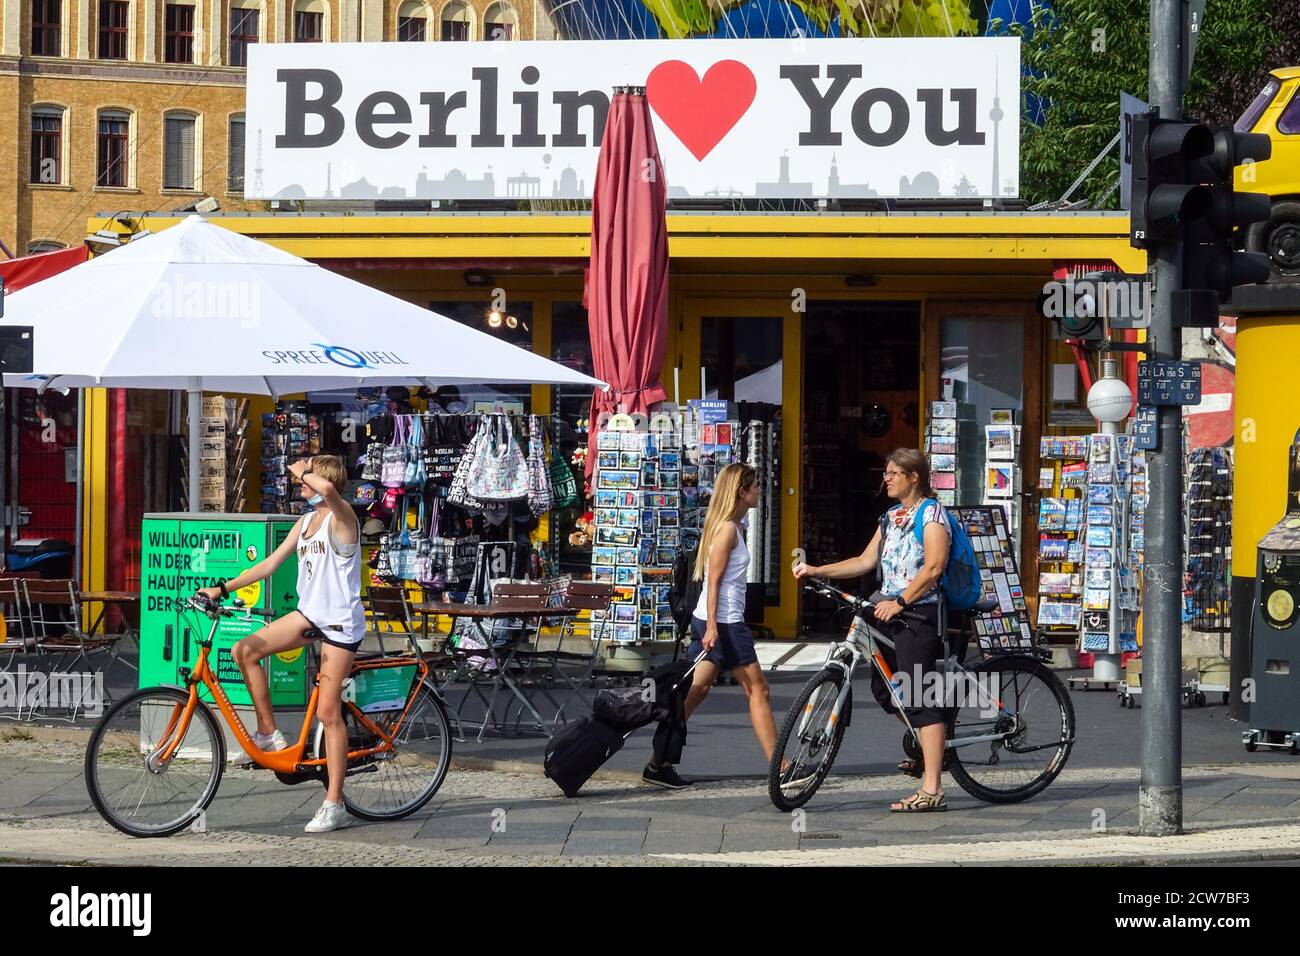 Berlin Love You stand and Tourist on bike Berlino Tourism people on bike Berlin bike Berlin bike Foto Stock